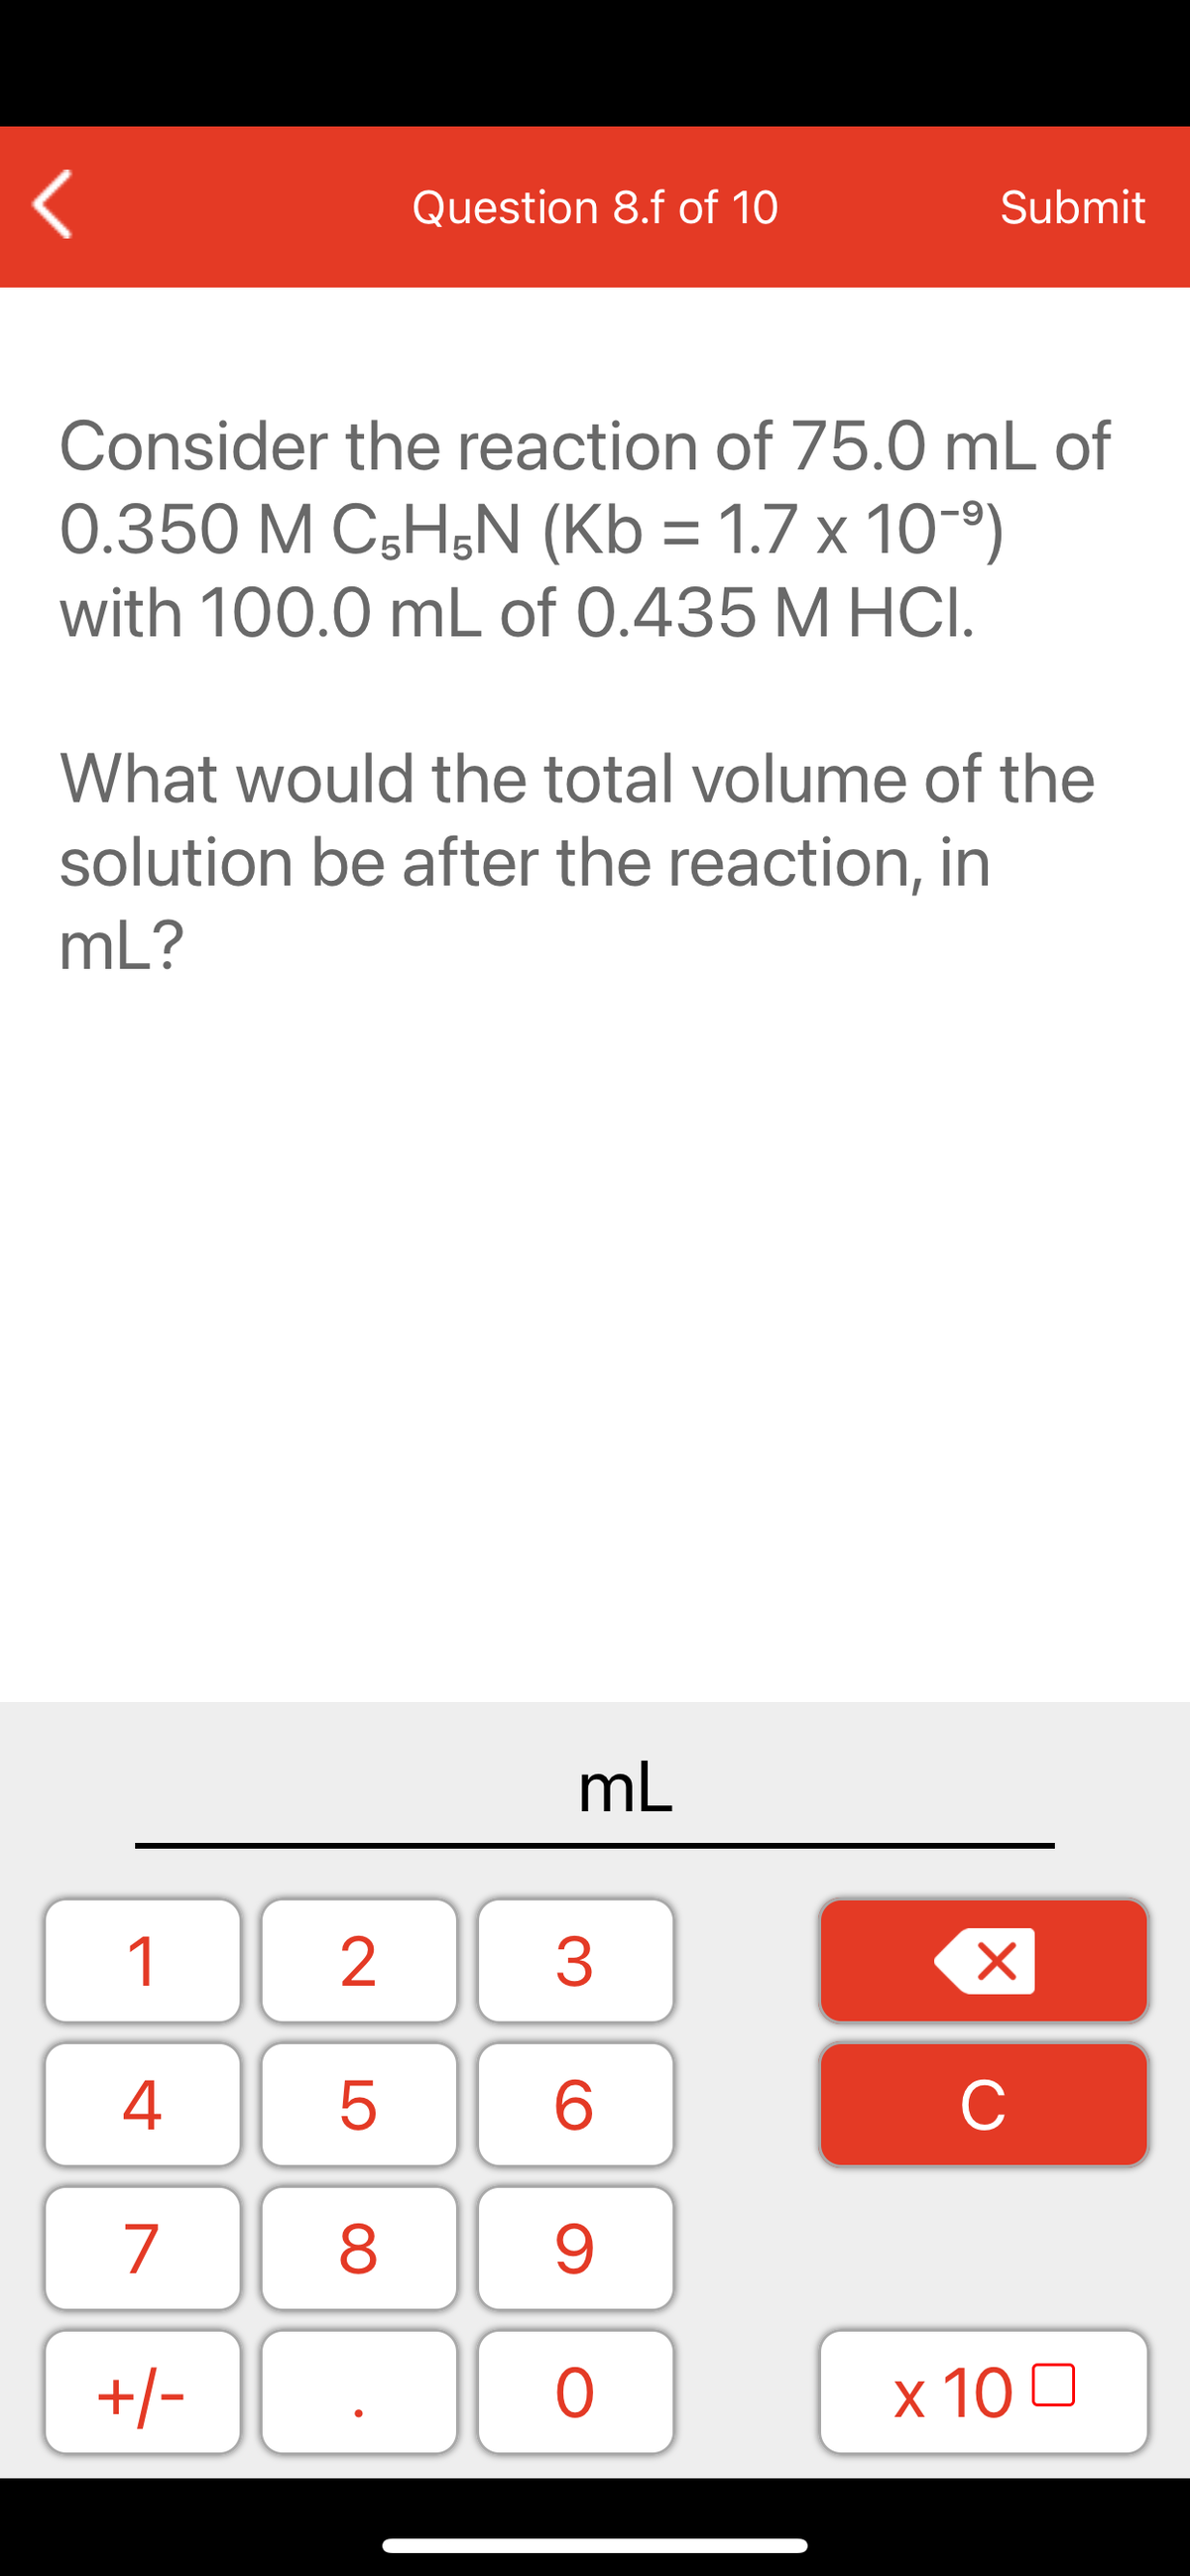 Question 8.f of 10
Submit
Consider the reaction of 75.0 mL of
0.350 M C5H;N (Kb = 1.7 x 10-)
with 100.0 mL of 0.435 M HCI.
What would the total volume of the
solution be after the reaction, in
mL?
mL
1
2
3
C
7
9.
+/-
x 10 0
LO
00
